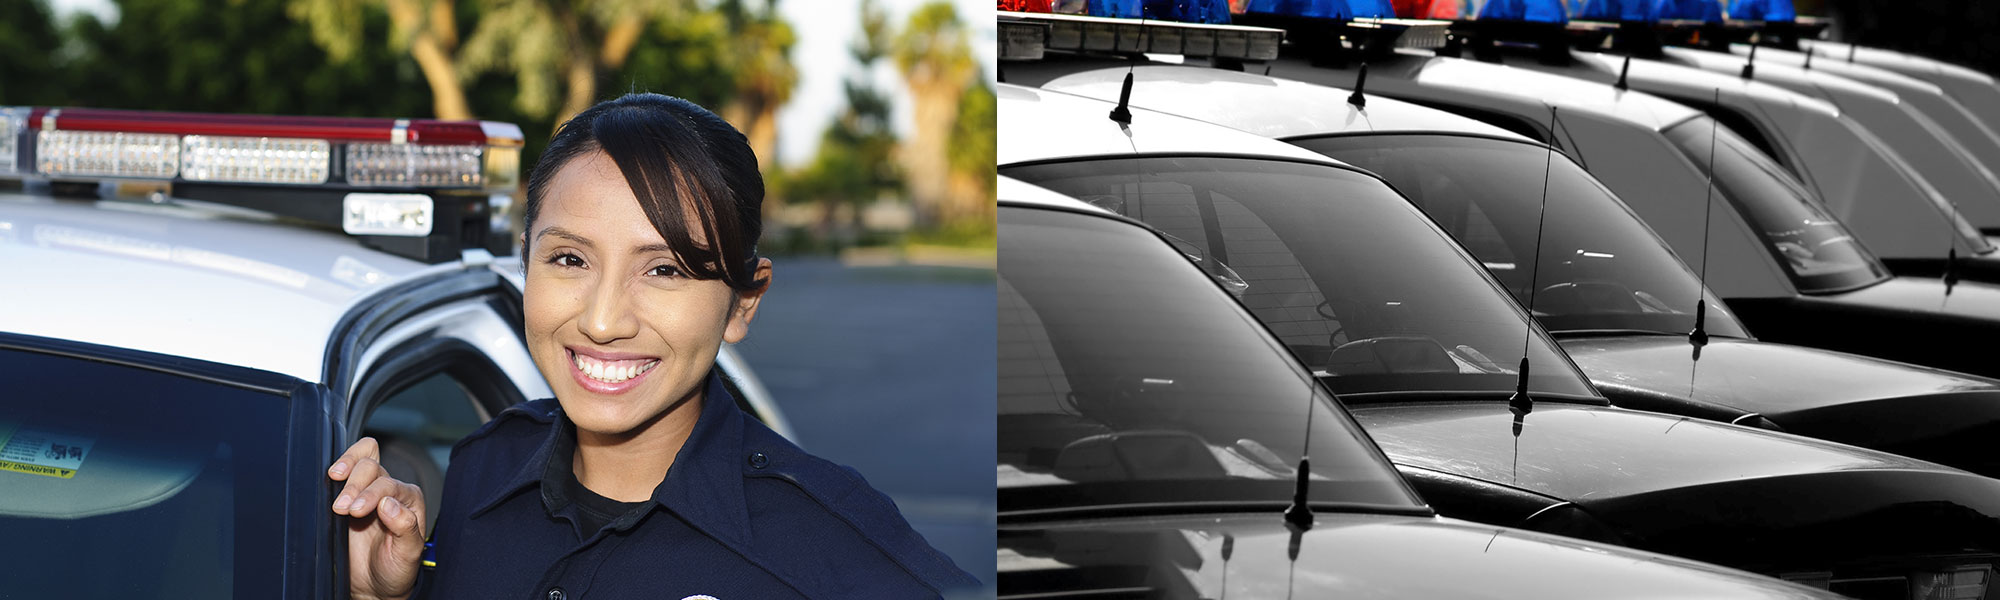 Female police officer and police cars - New for 2021- 2022